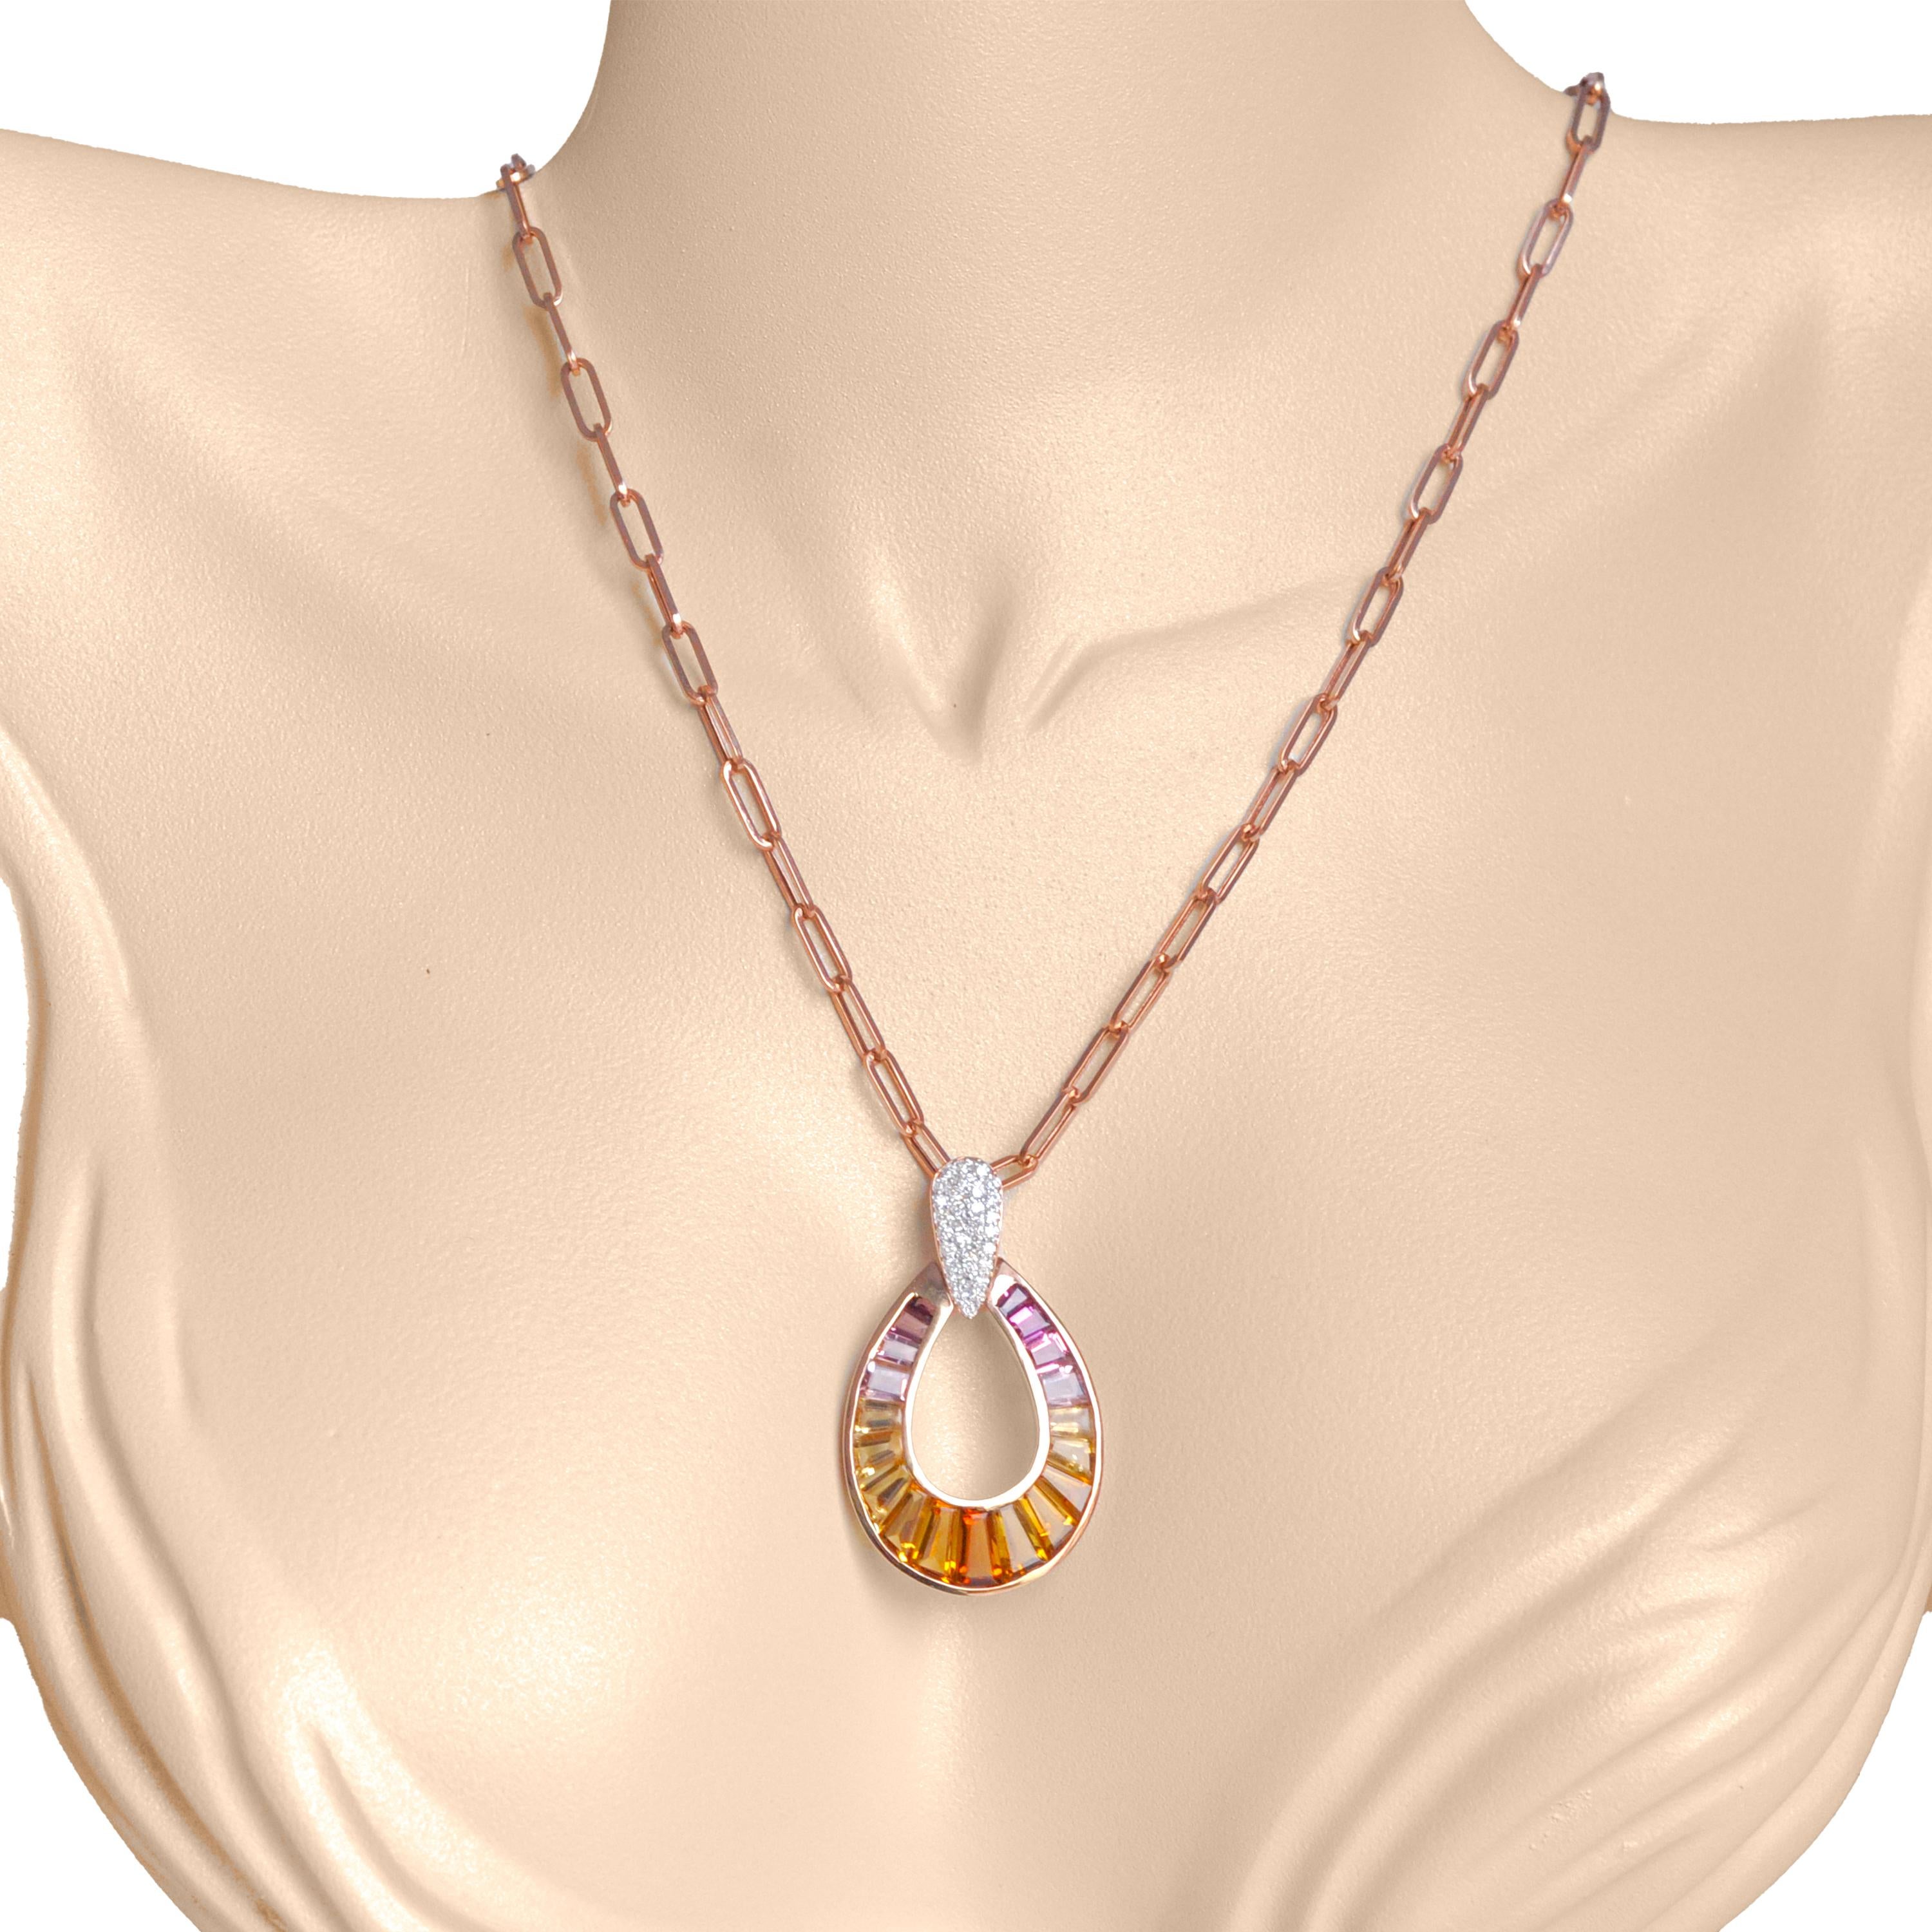 Prepare to be enchanted by our 18-karat rose gold taper baguette citrine and pink tourmaline raindrop diamond pendant necklace. Meticulously crafted, this masterpiece seamlessly blends elegance and sophistication.

Skilled artisans designed the